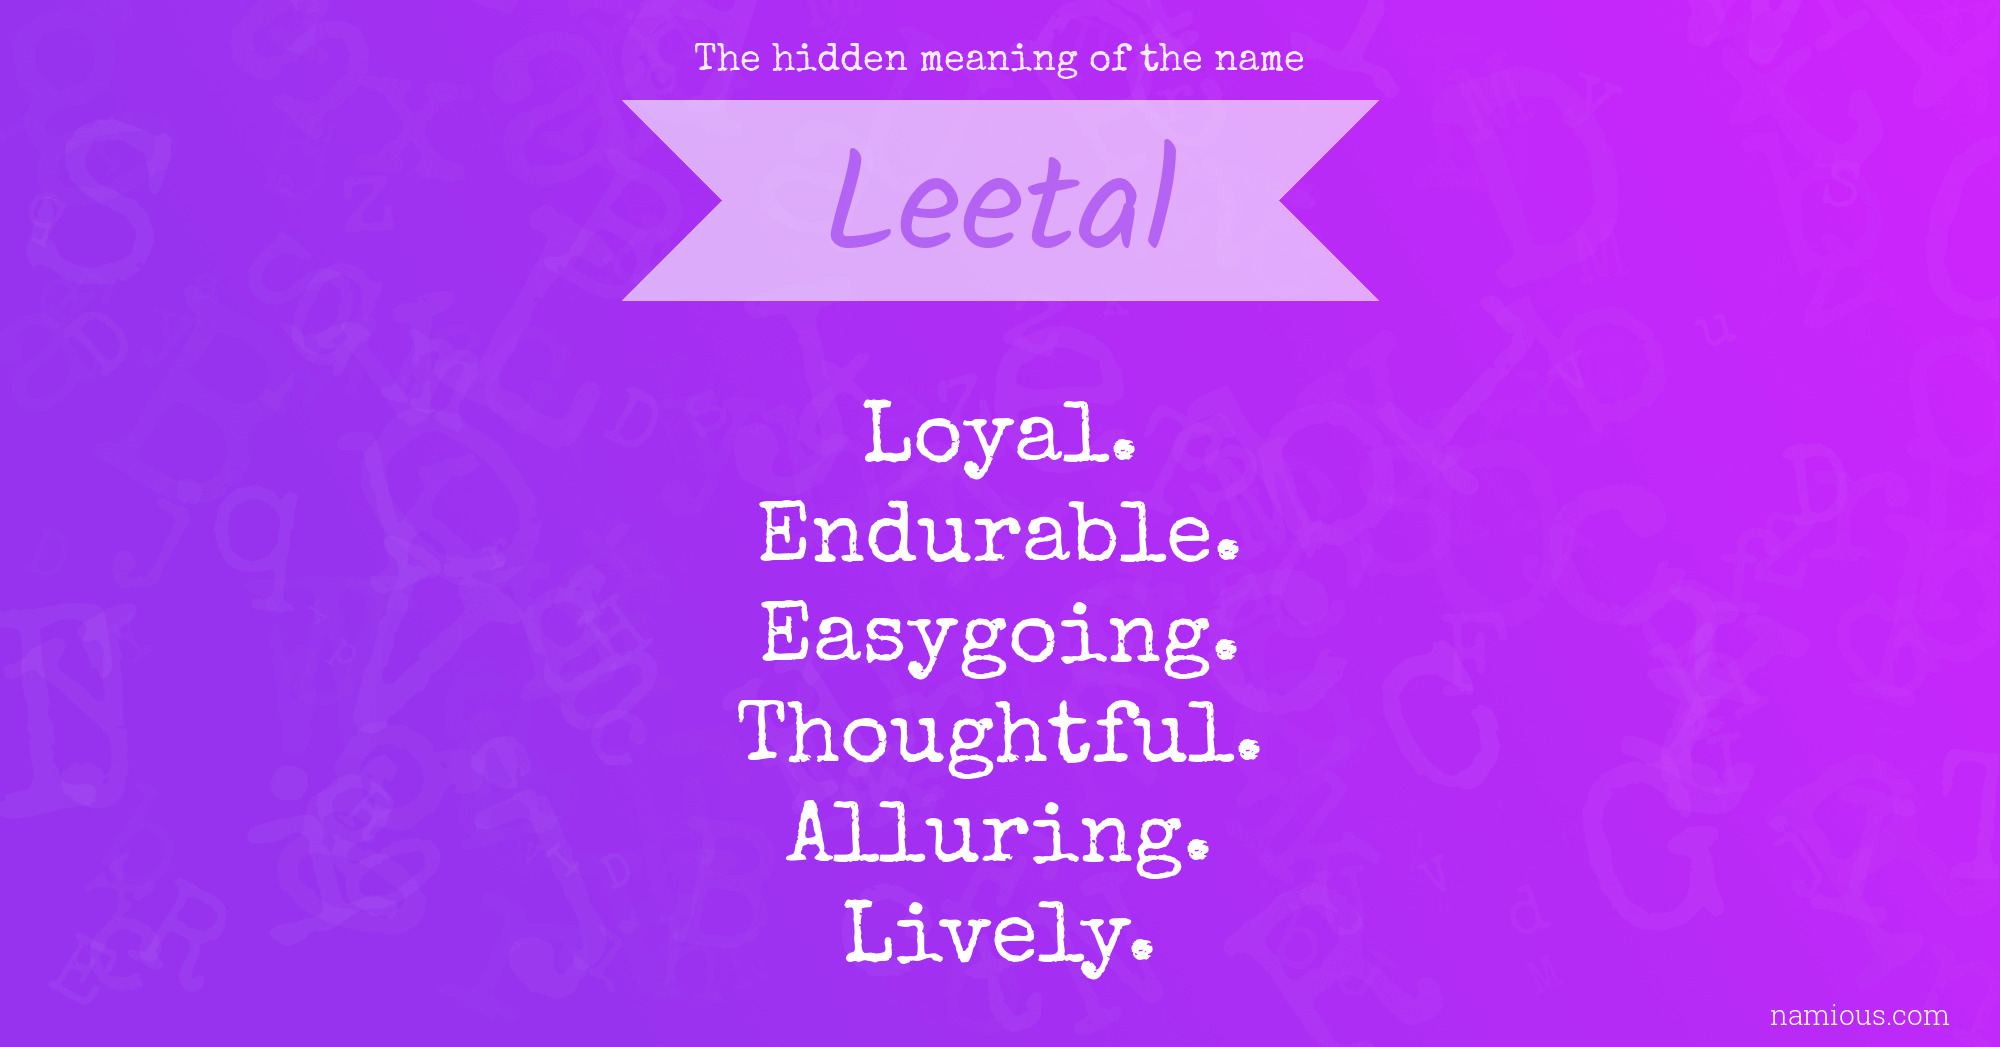 The hidden meaning of the name Leetal